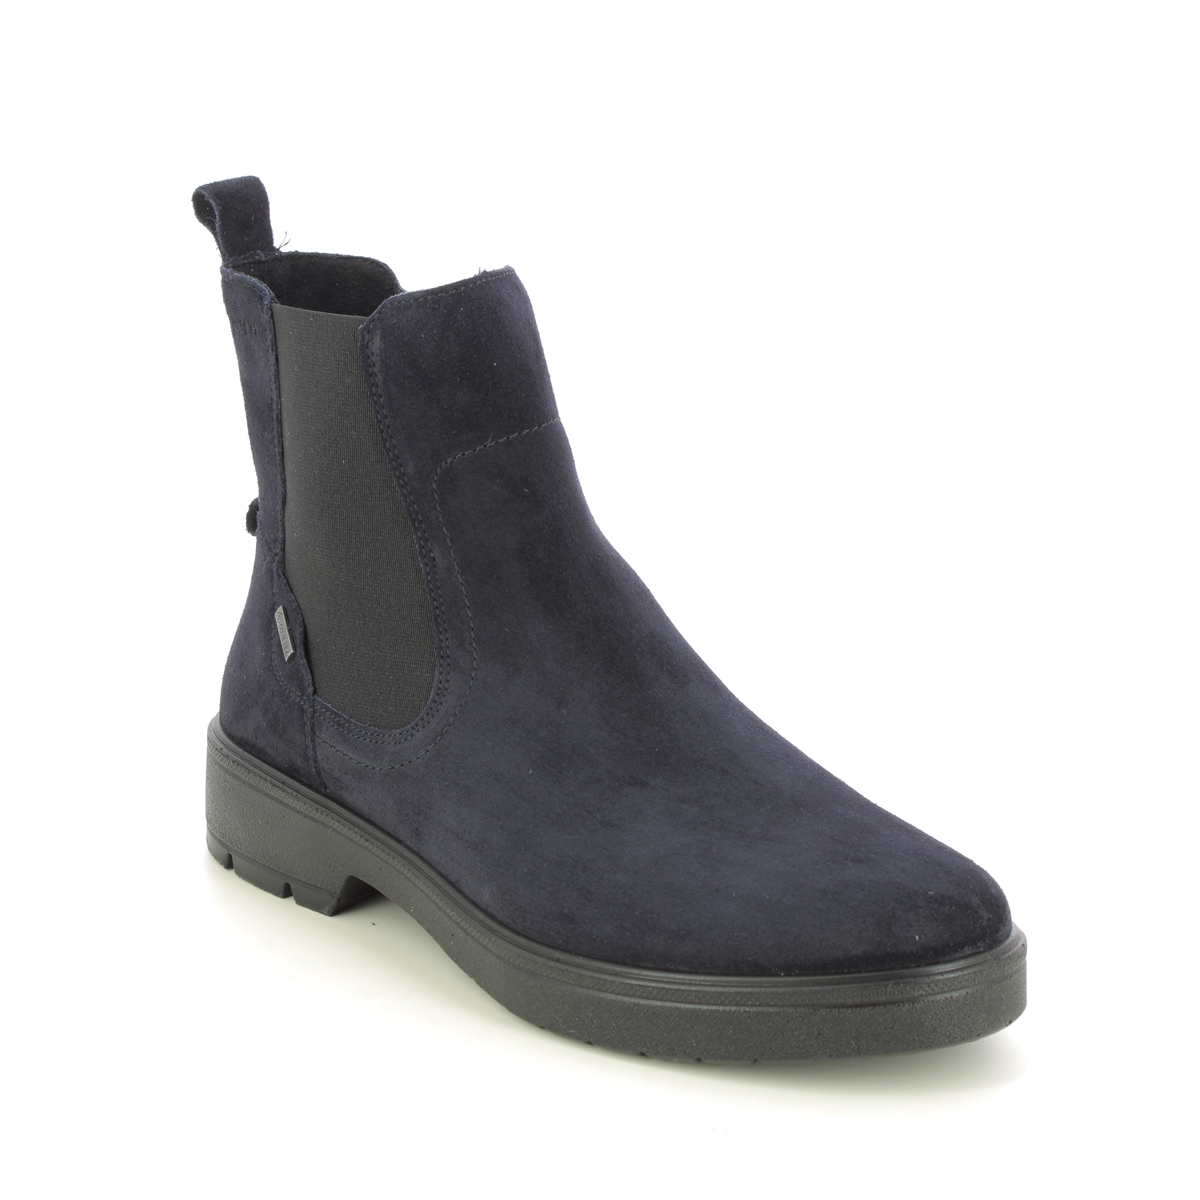 Legero Mystic Chelsea Gtx Navy Suede Womens Chelsea Boots 2000191-8000 In Size 4.5 In Plain Navy Suede